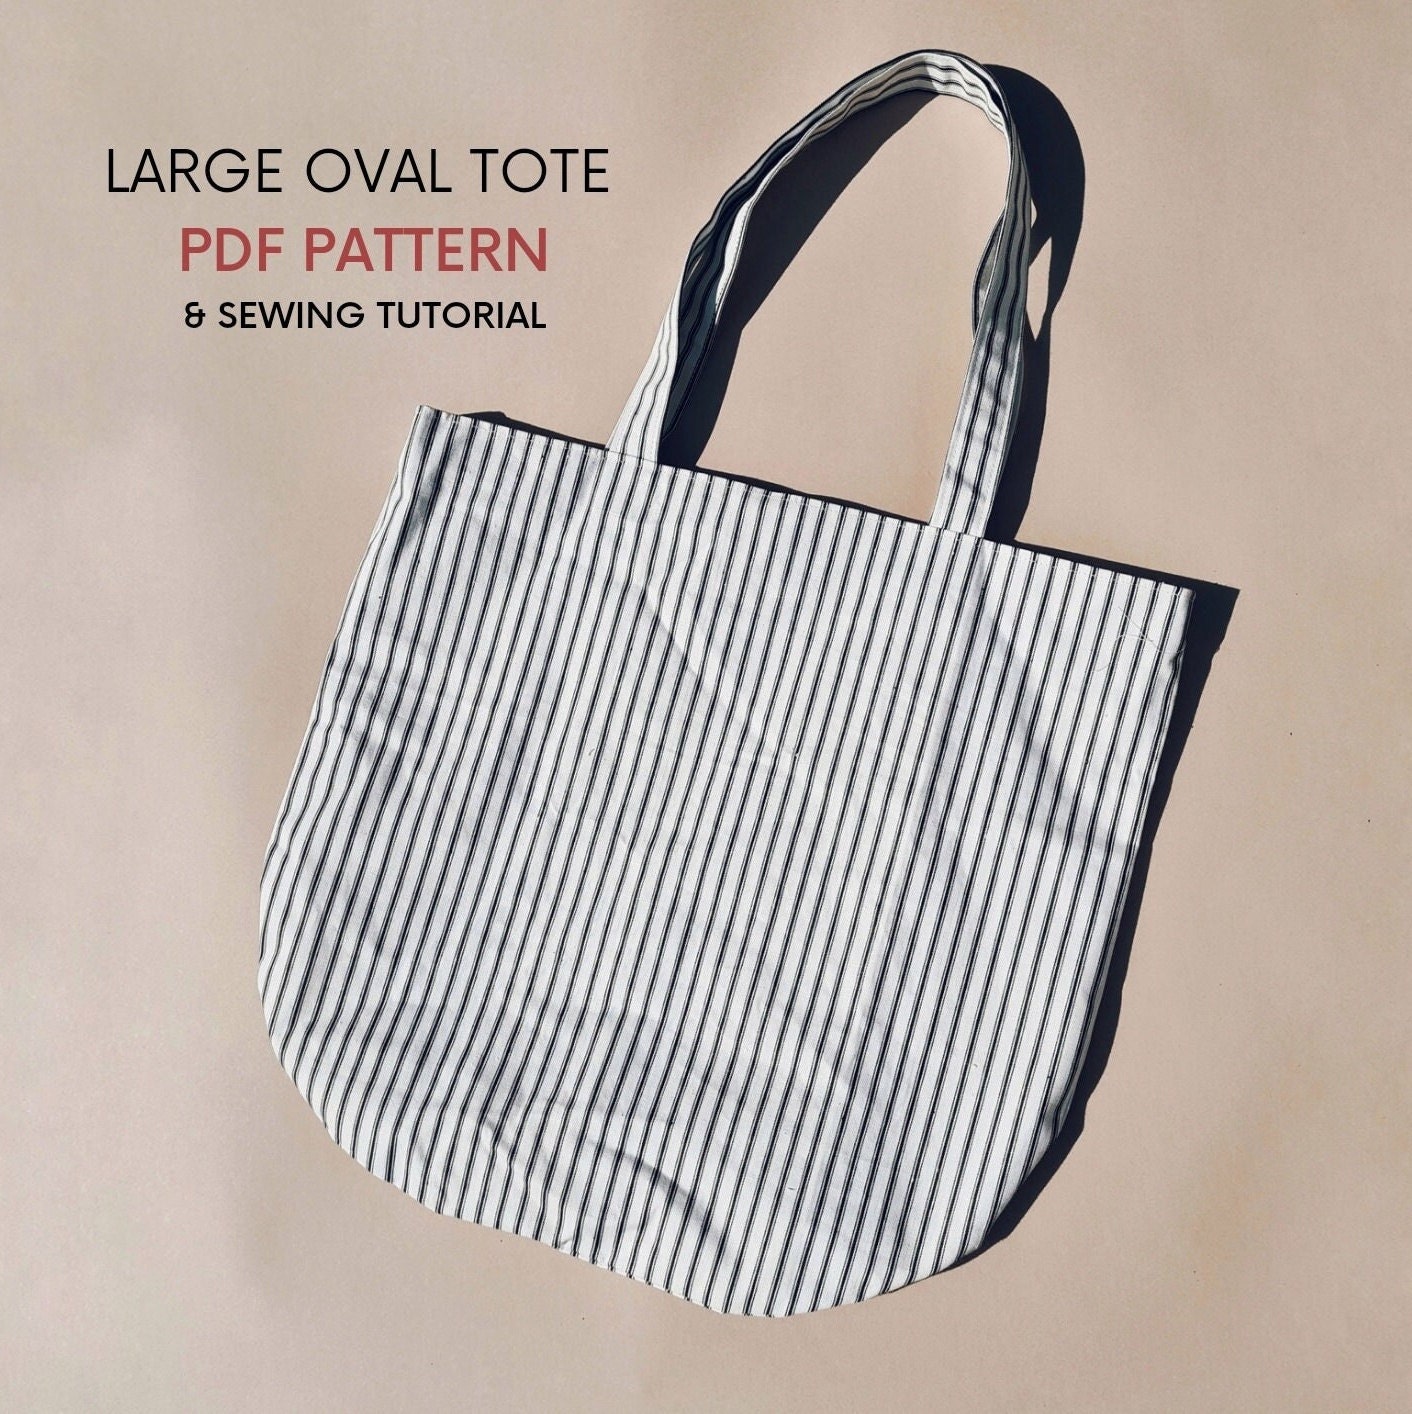 Buy Large Knot Bag PDF Sewing Pattern With Tutorial Instant Online in India  